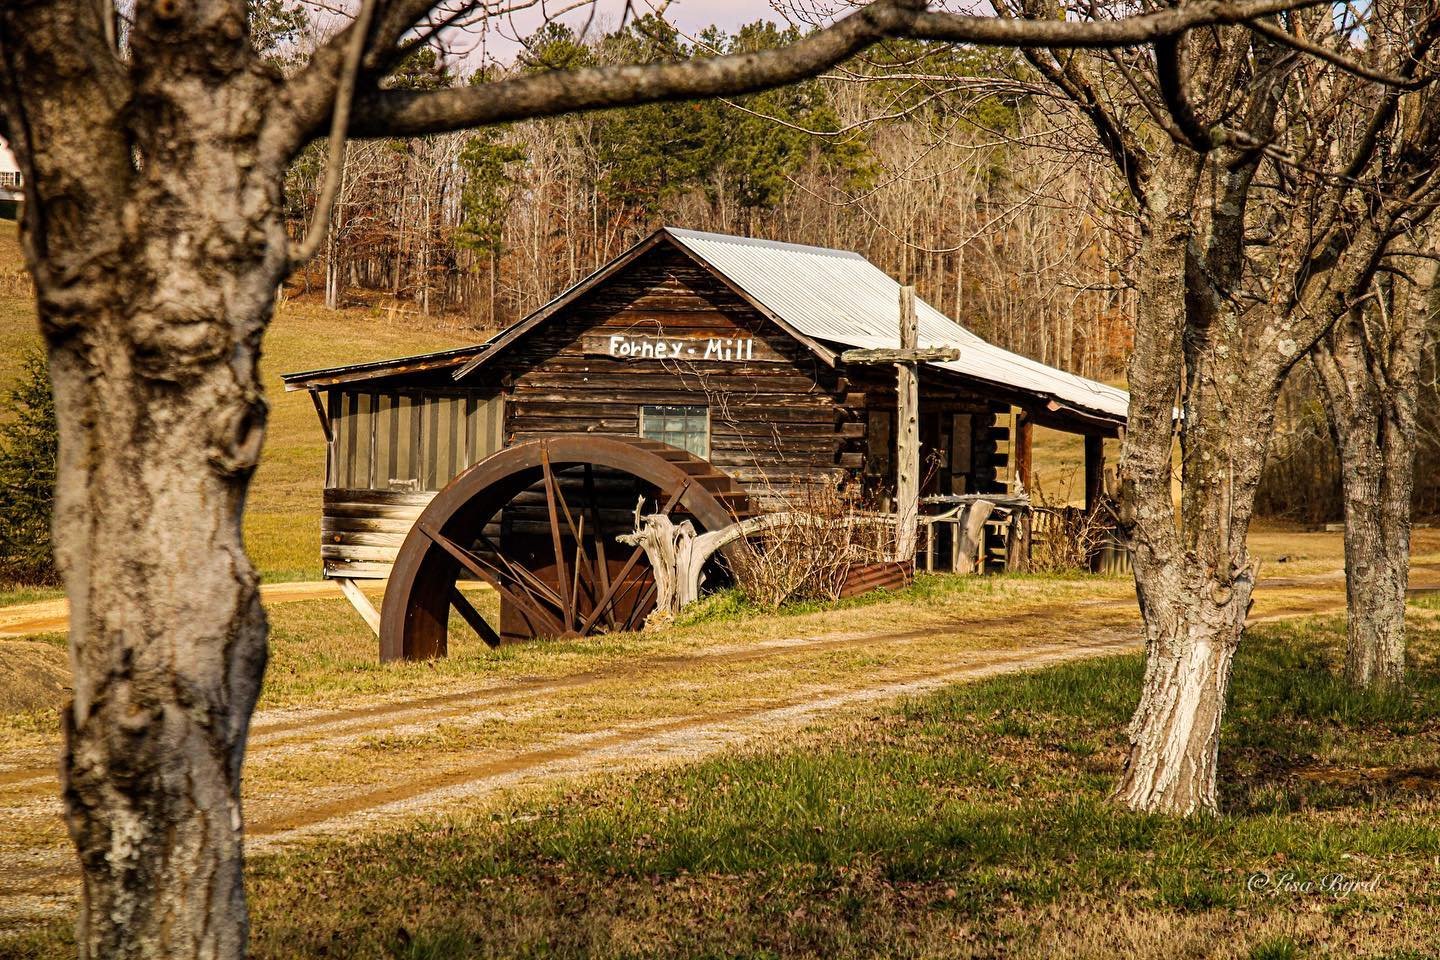 Forney Mill located in Centre, Alabama.